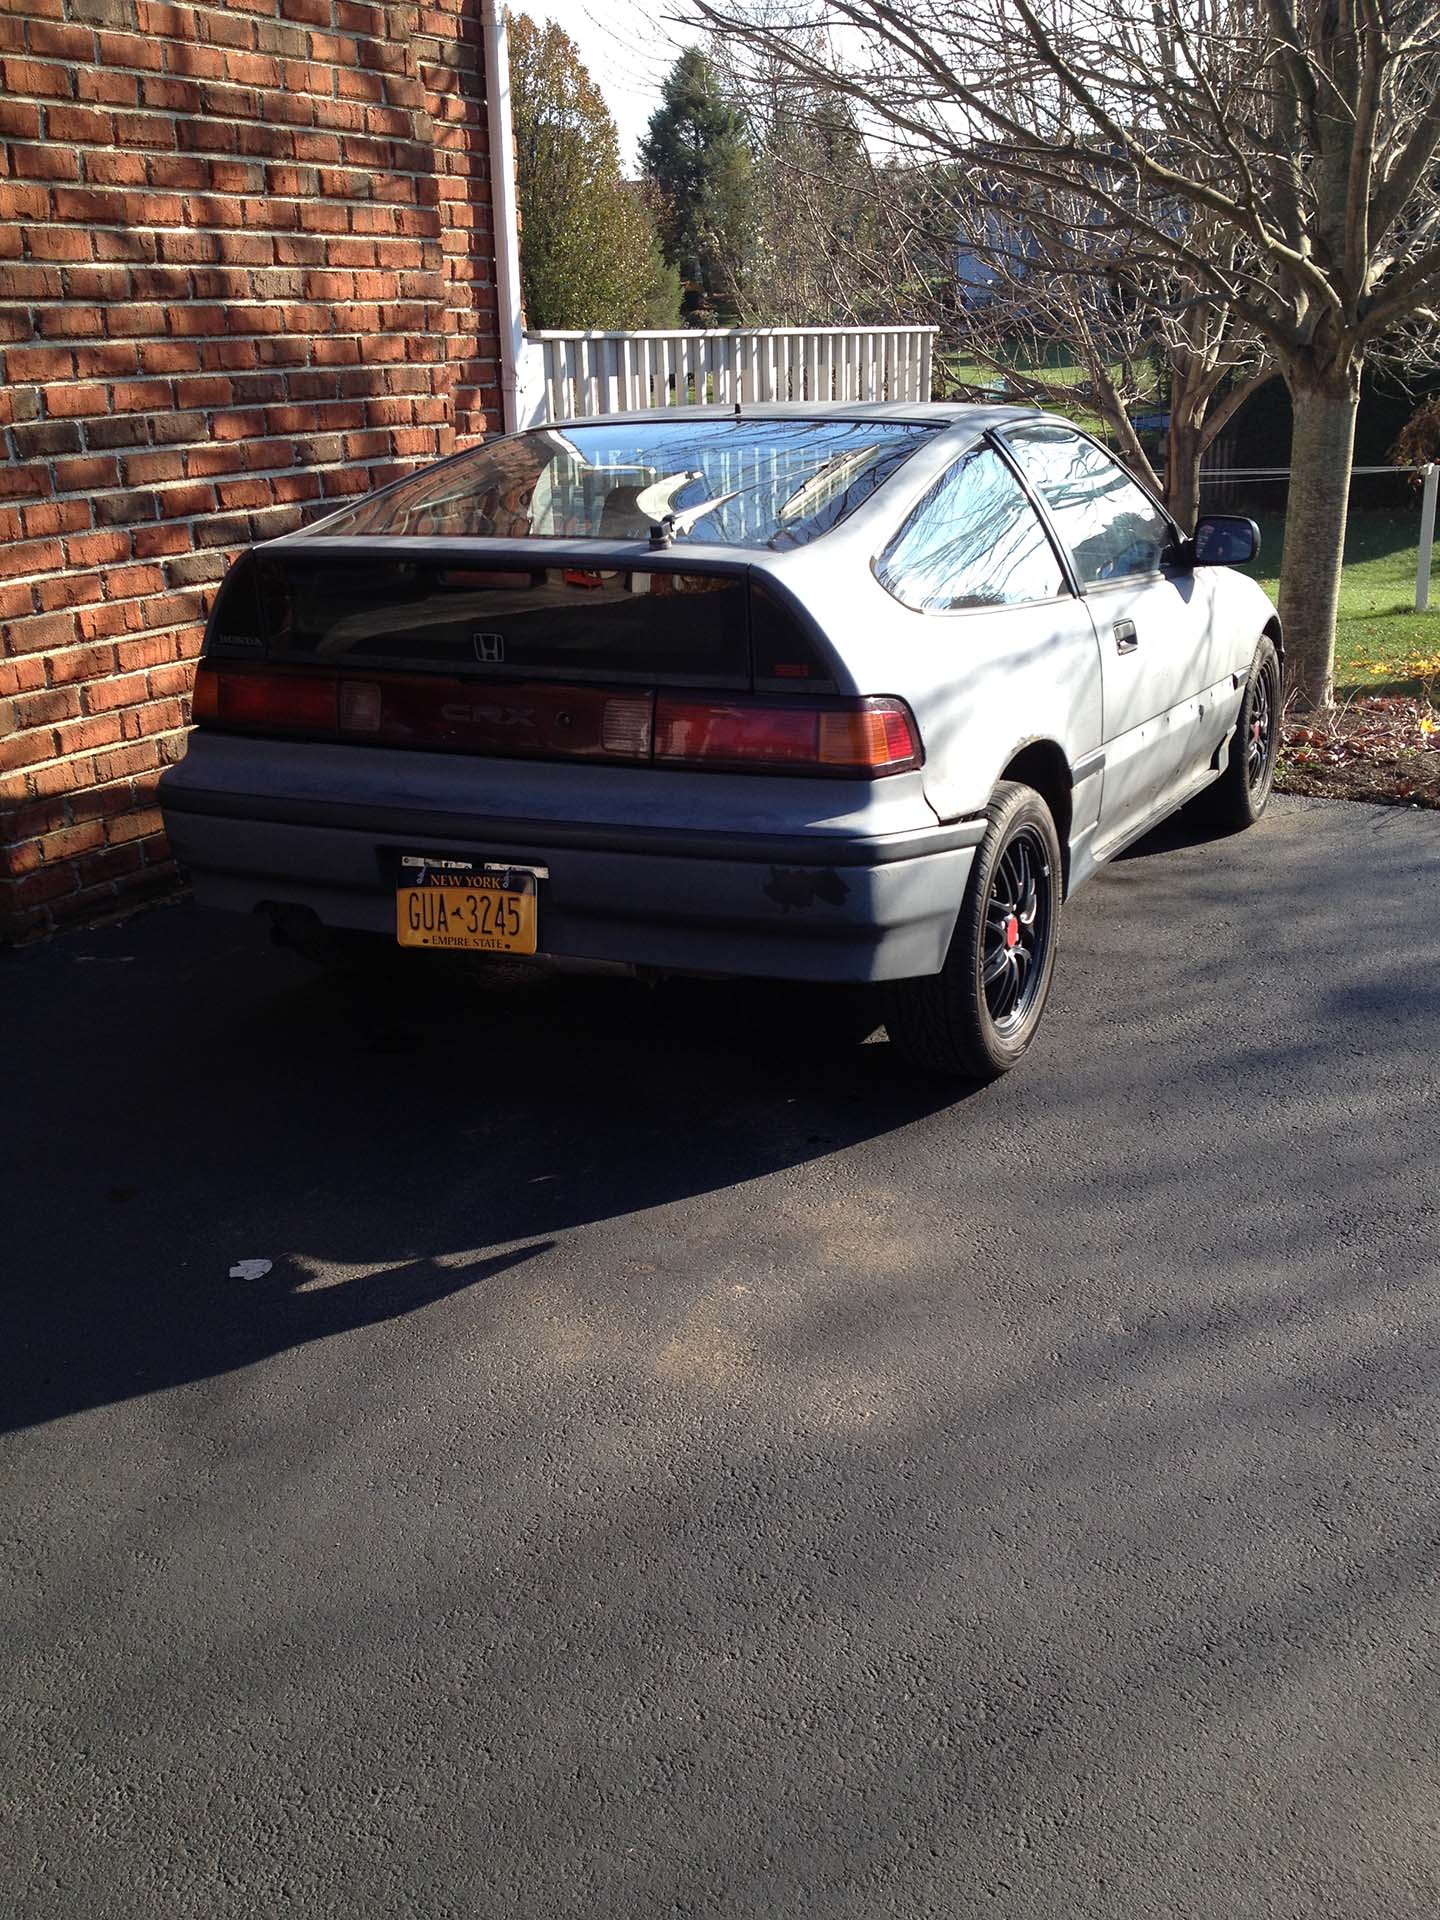 CRX with NY License Plate